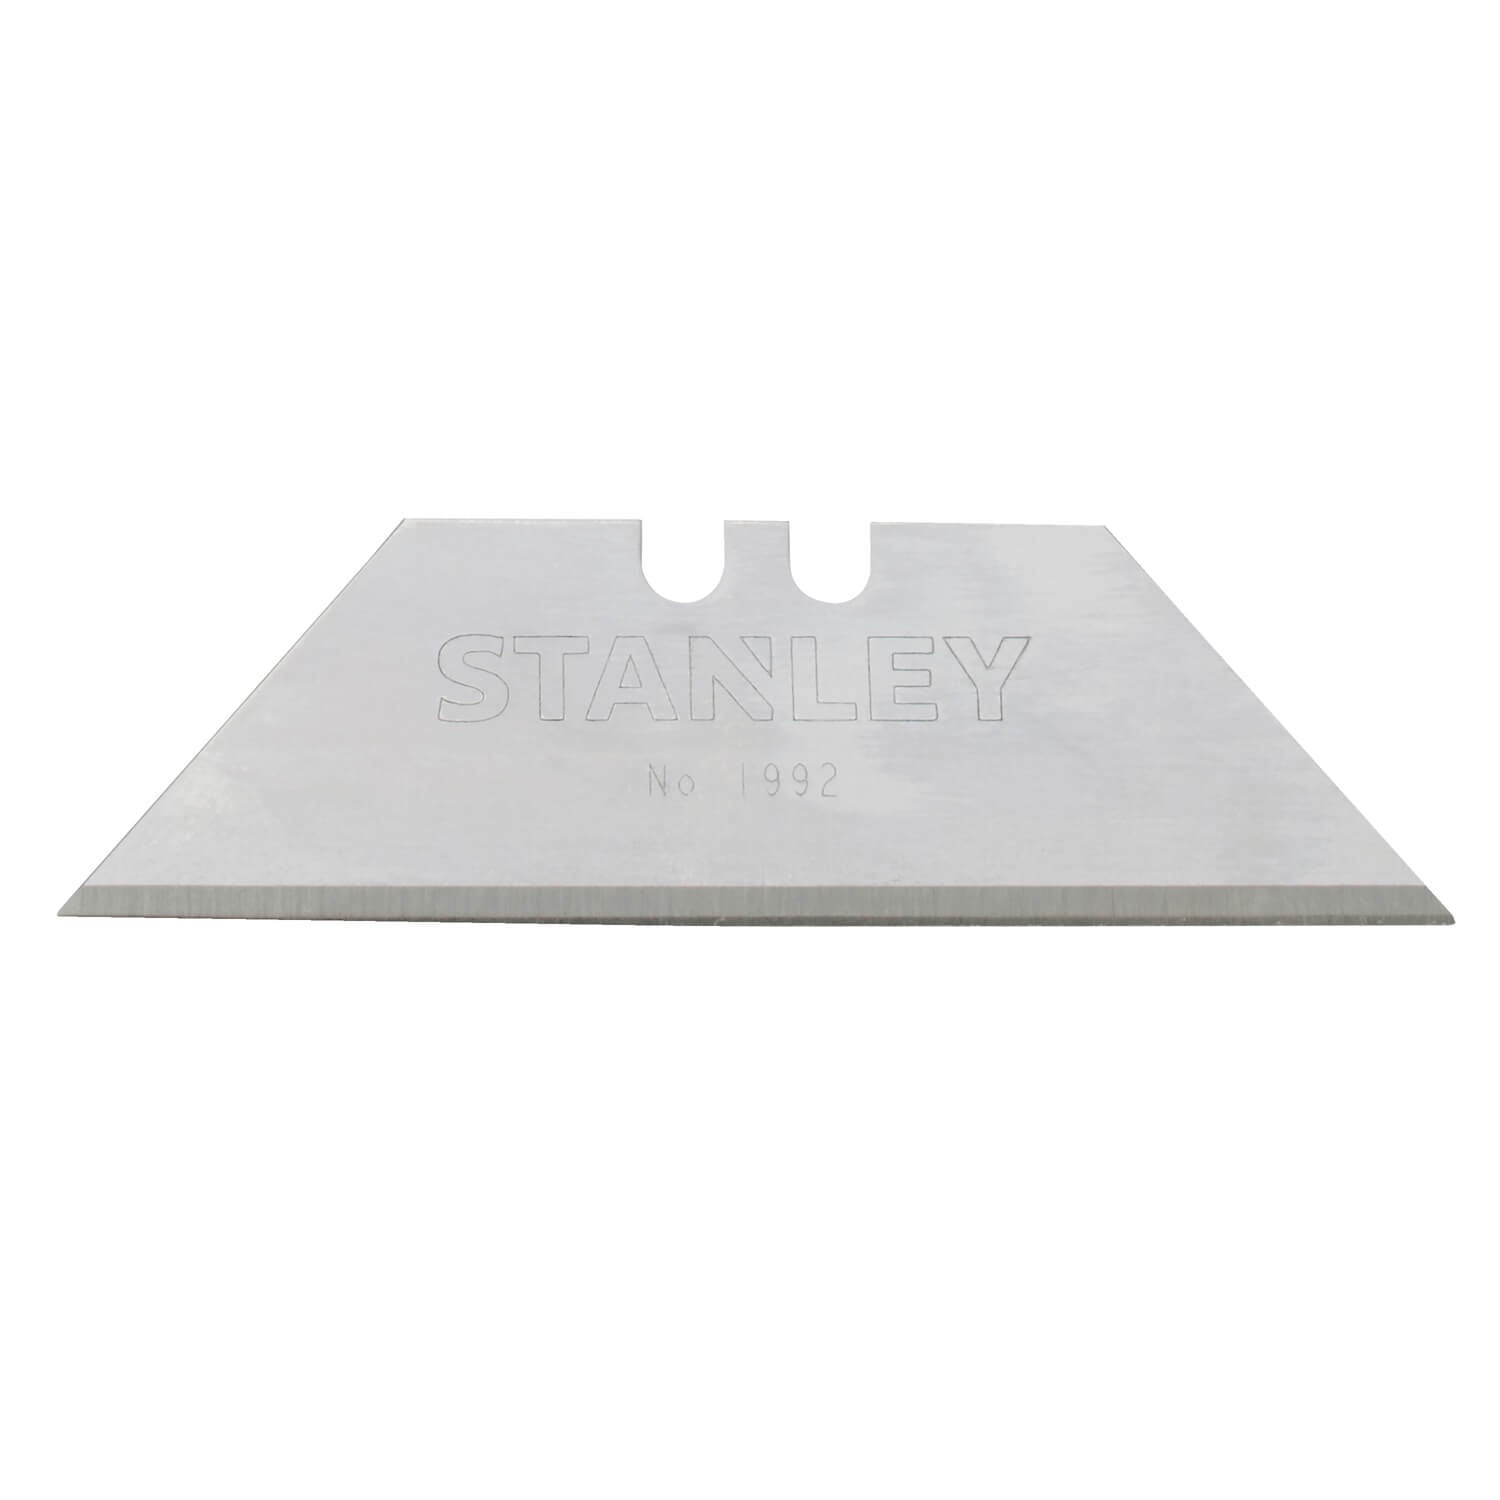 STANLEY 11-921  -  5 PK 1992® HEAVY-DUTY UTILITY BLADES - wise-line-tools